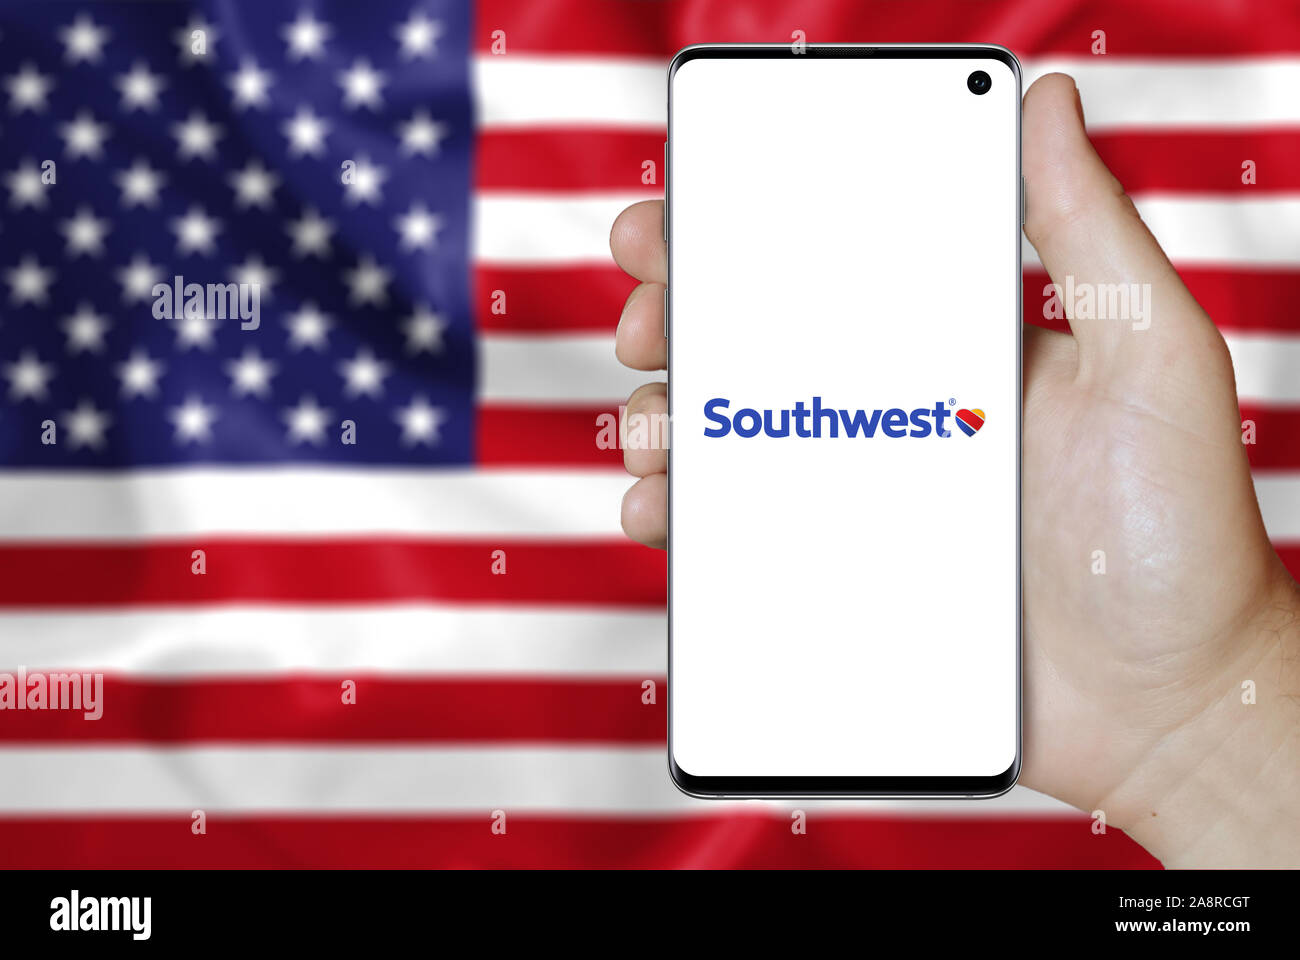 Logo of public company Southwest Airlines displayed on a smartphone. Flag of USA background. Credit: PIXDUCE Stock Photo